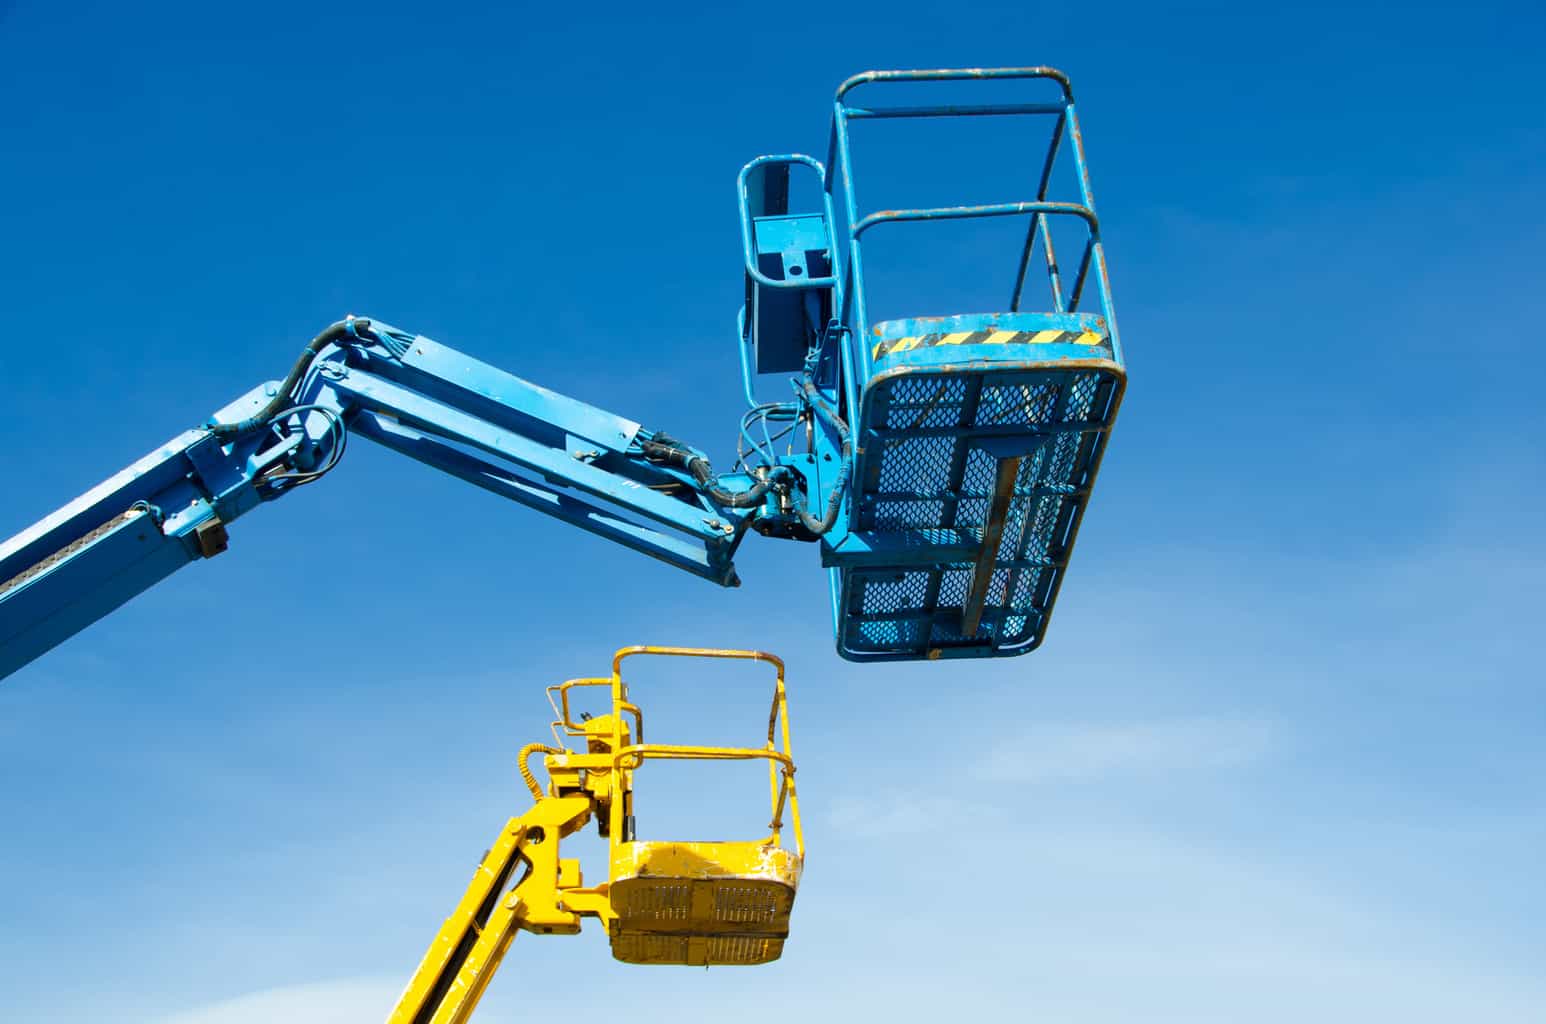 Two crane's baskets against clear sky. Lifters in blue and yellow